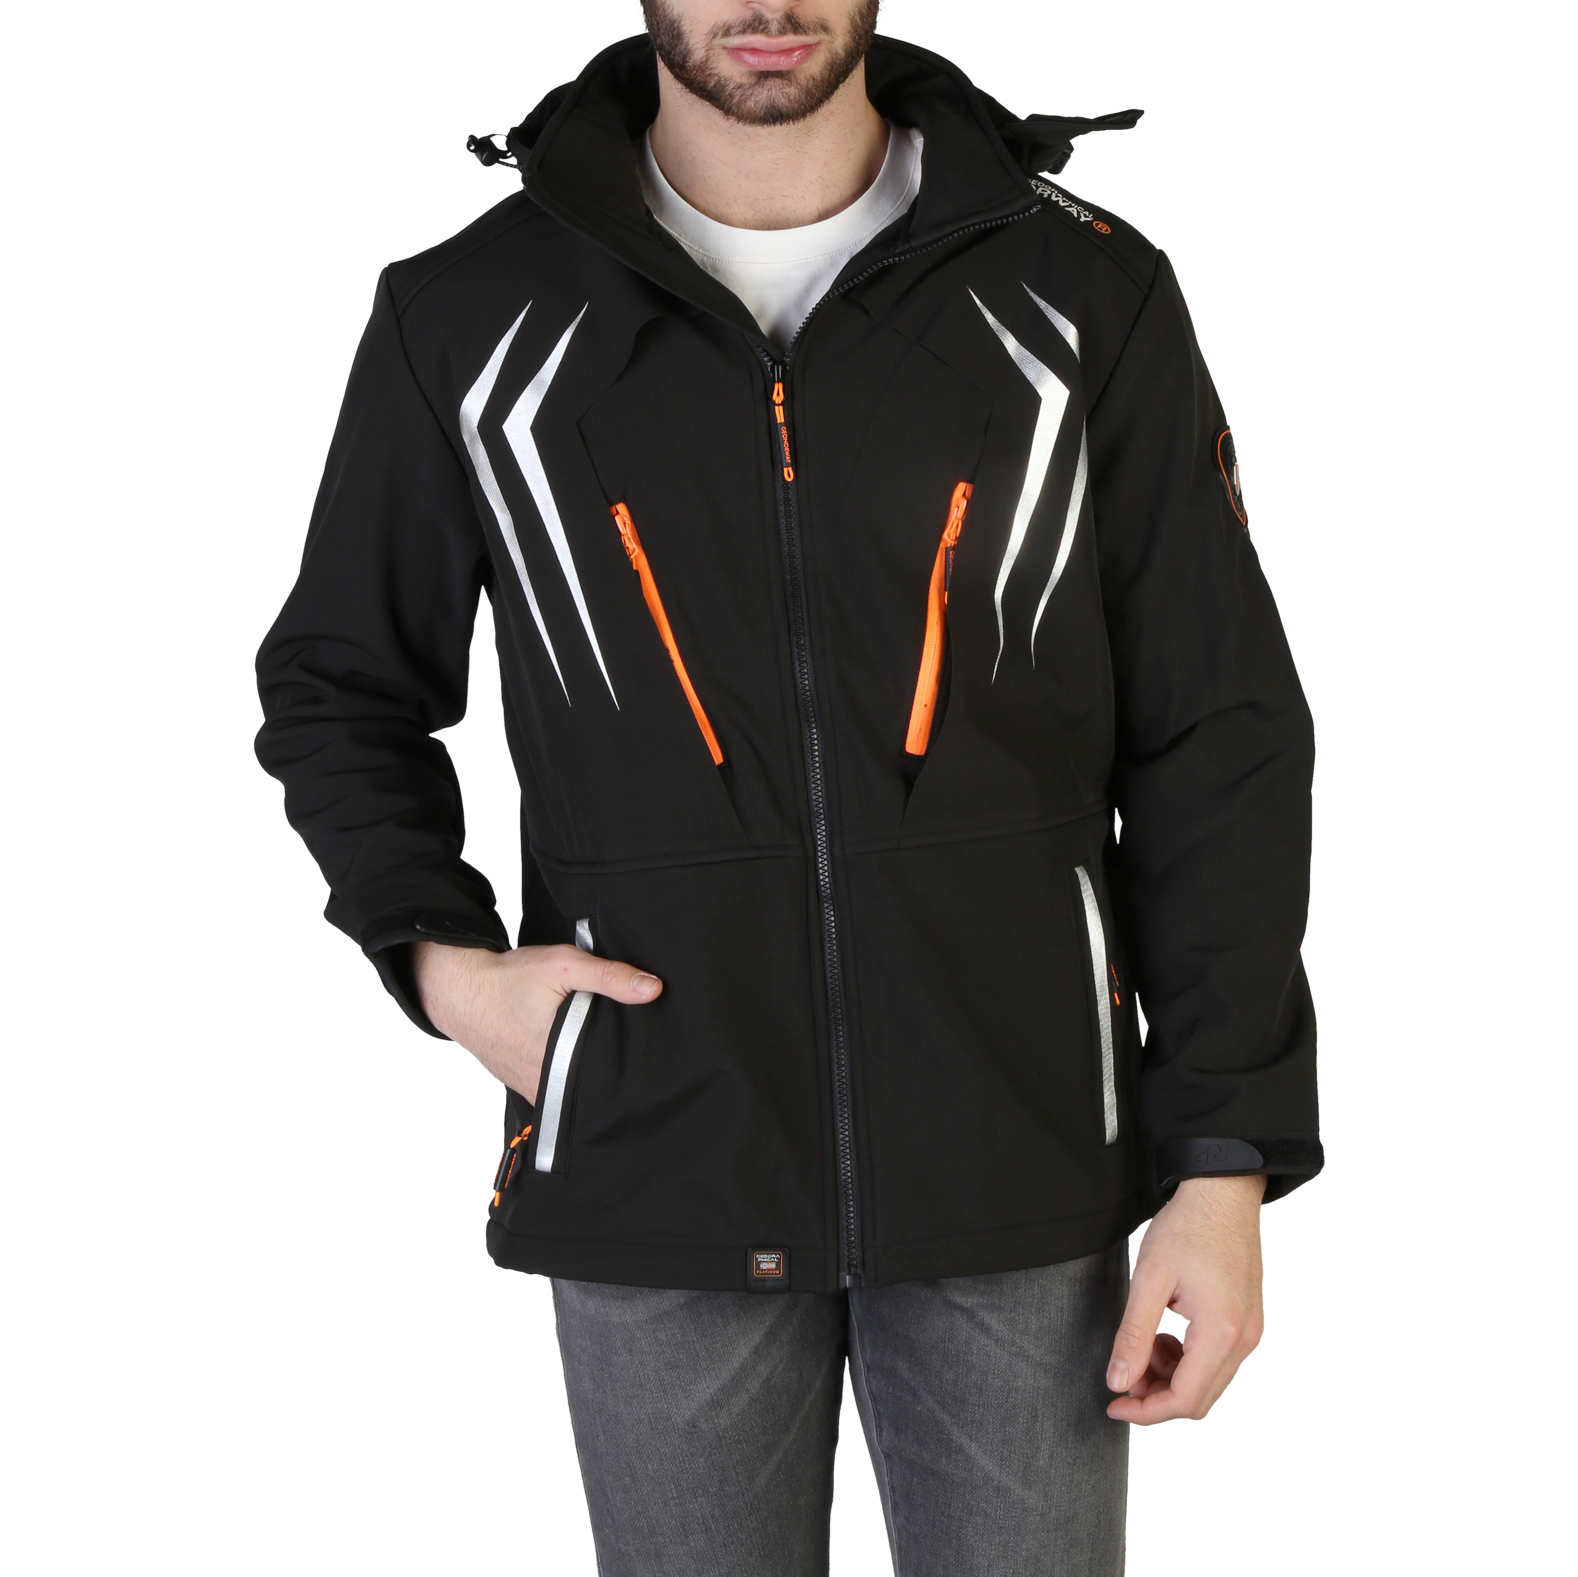 Geographical Norway Tiger man